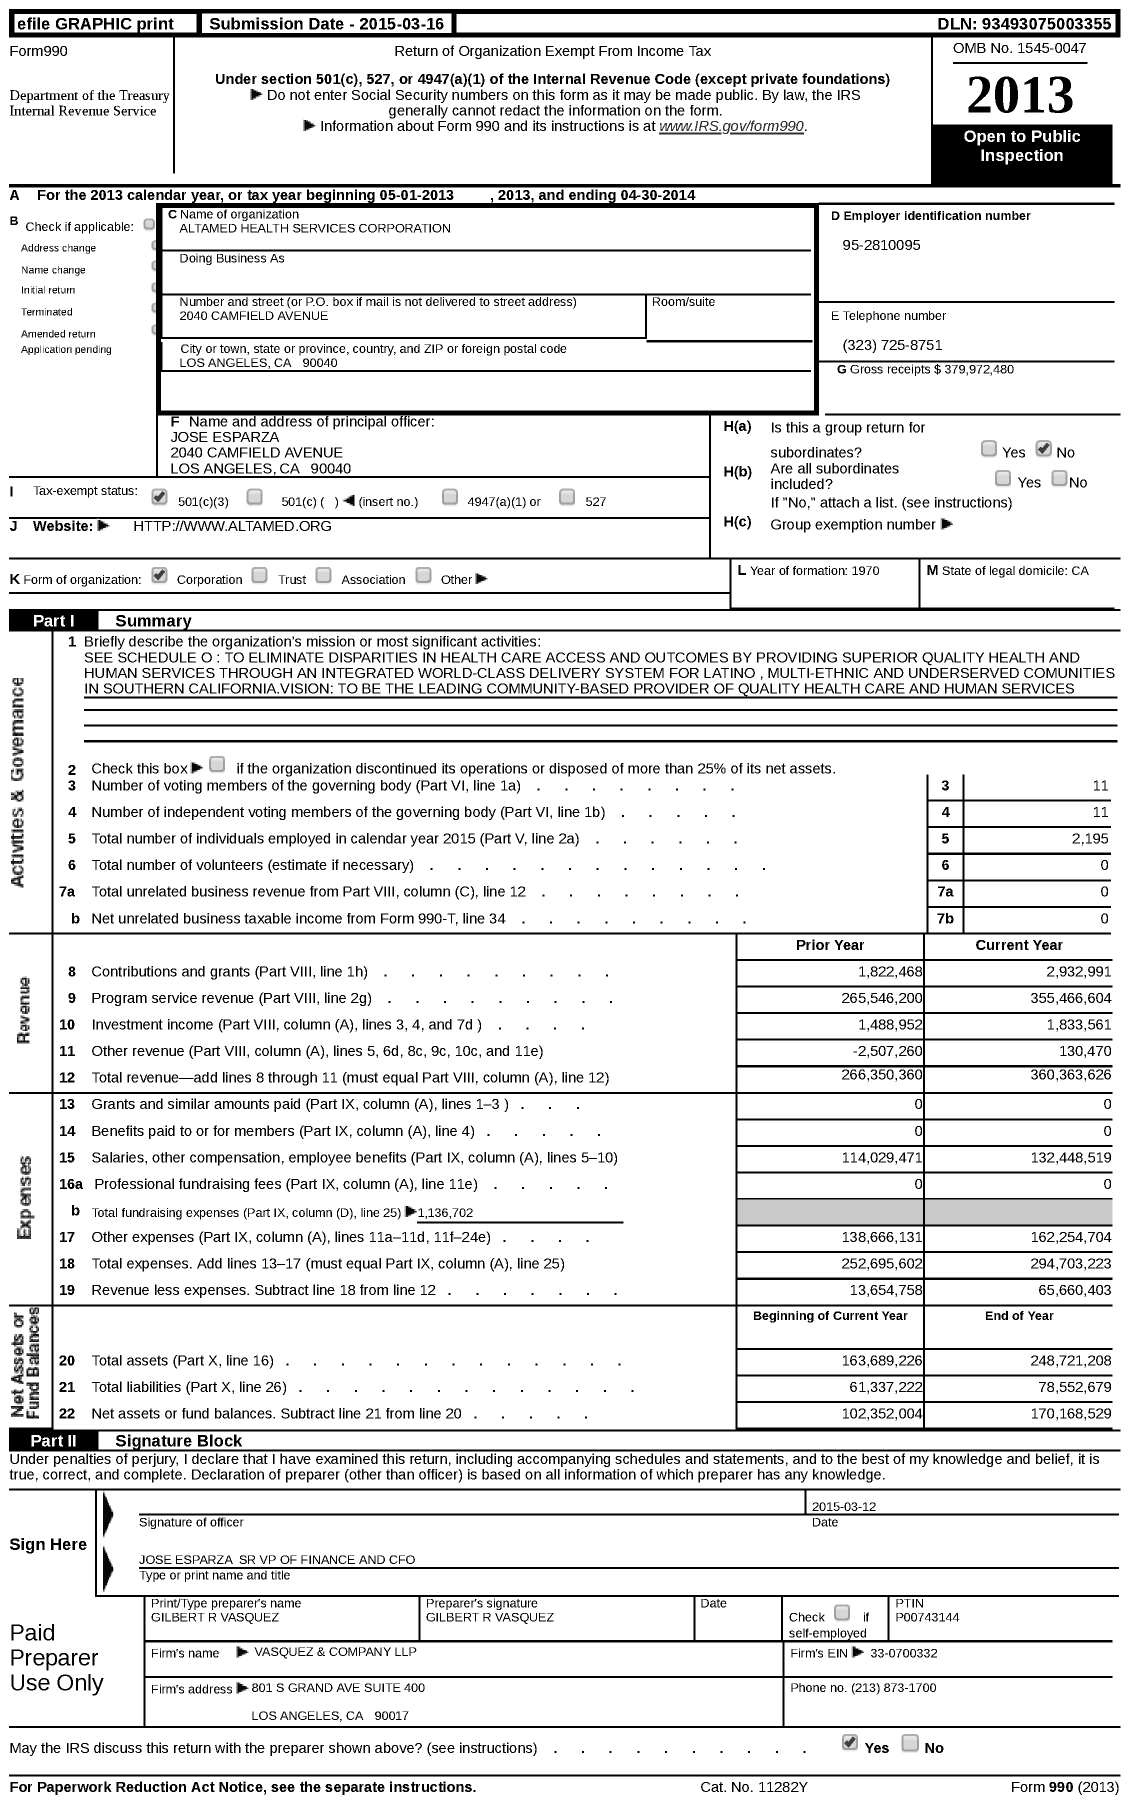 Image of first page of 2013 Form 990 for AltaMed Health Services Corporation